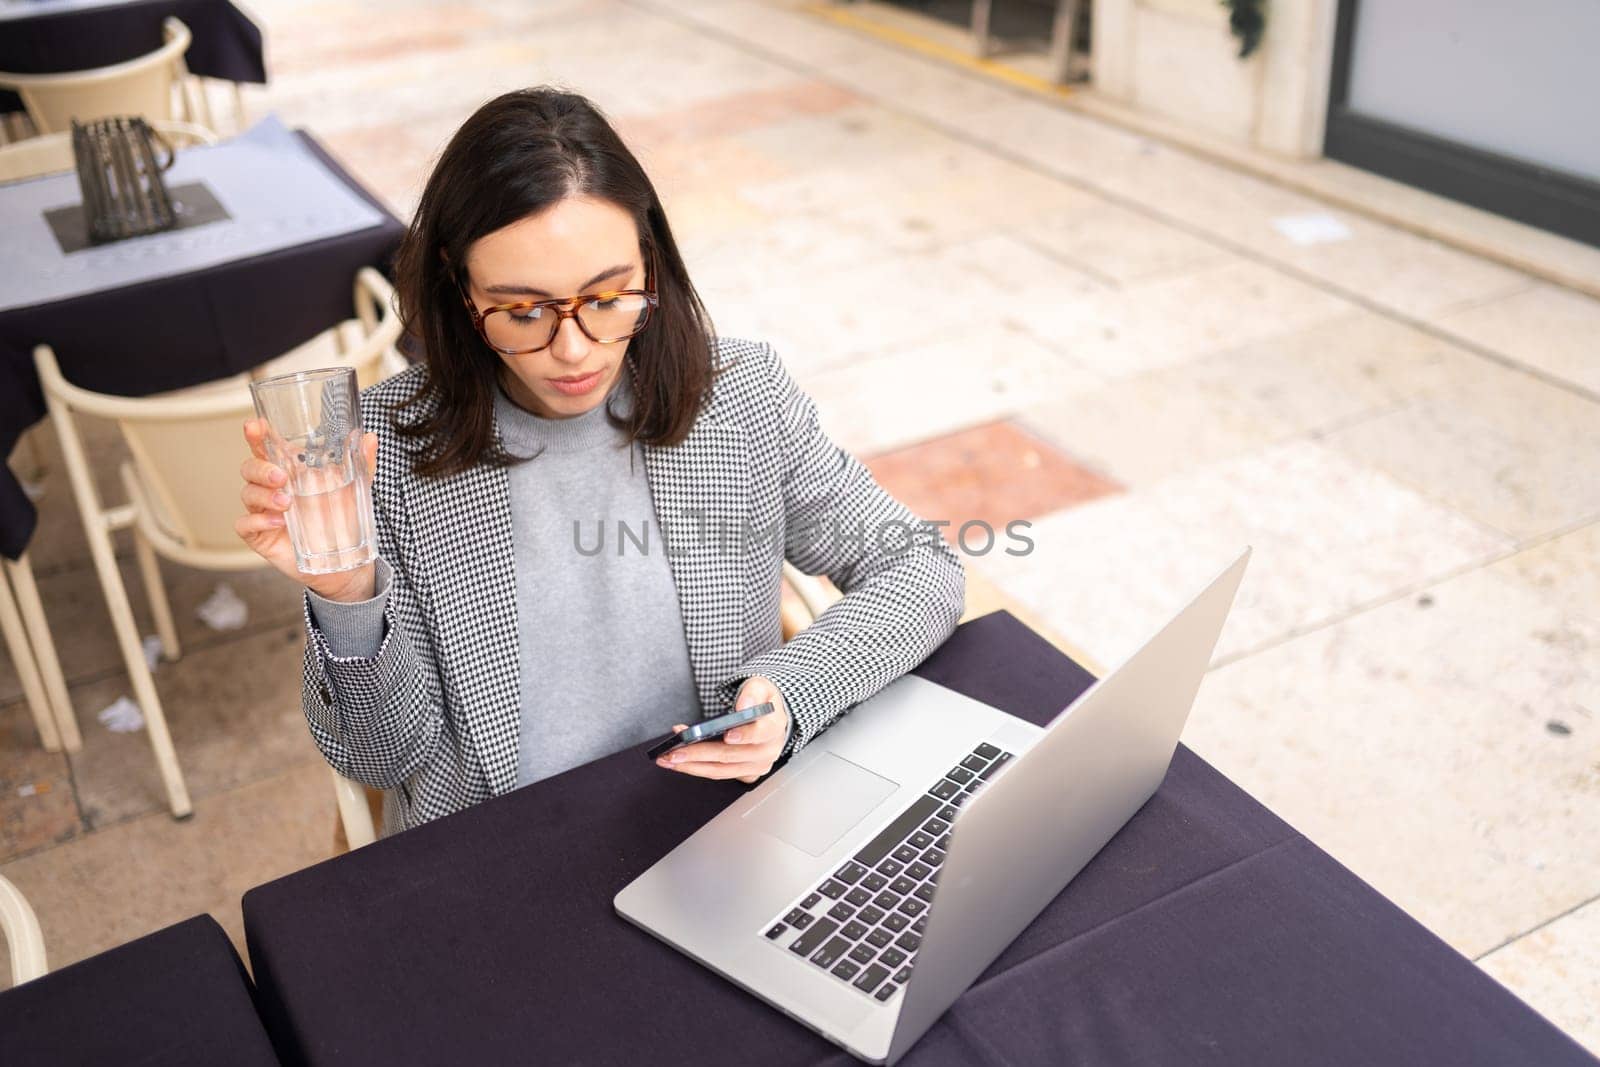 Freelancer using smartphone and laptop sitting outdoor cafe drink water wearing glasses, working in cafe on laptop, holding mobile phone in hands, drinking water from glass. High angle view